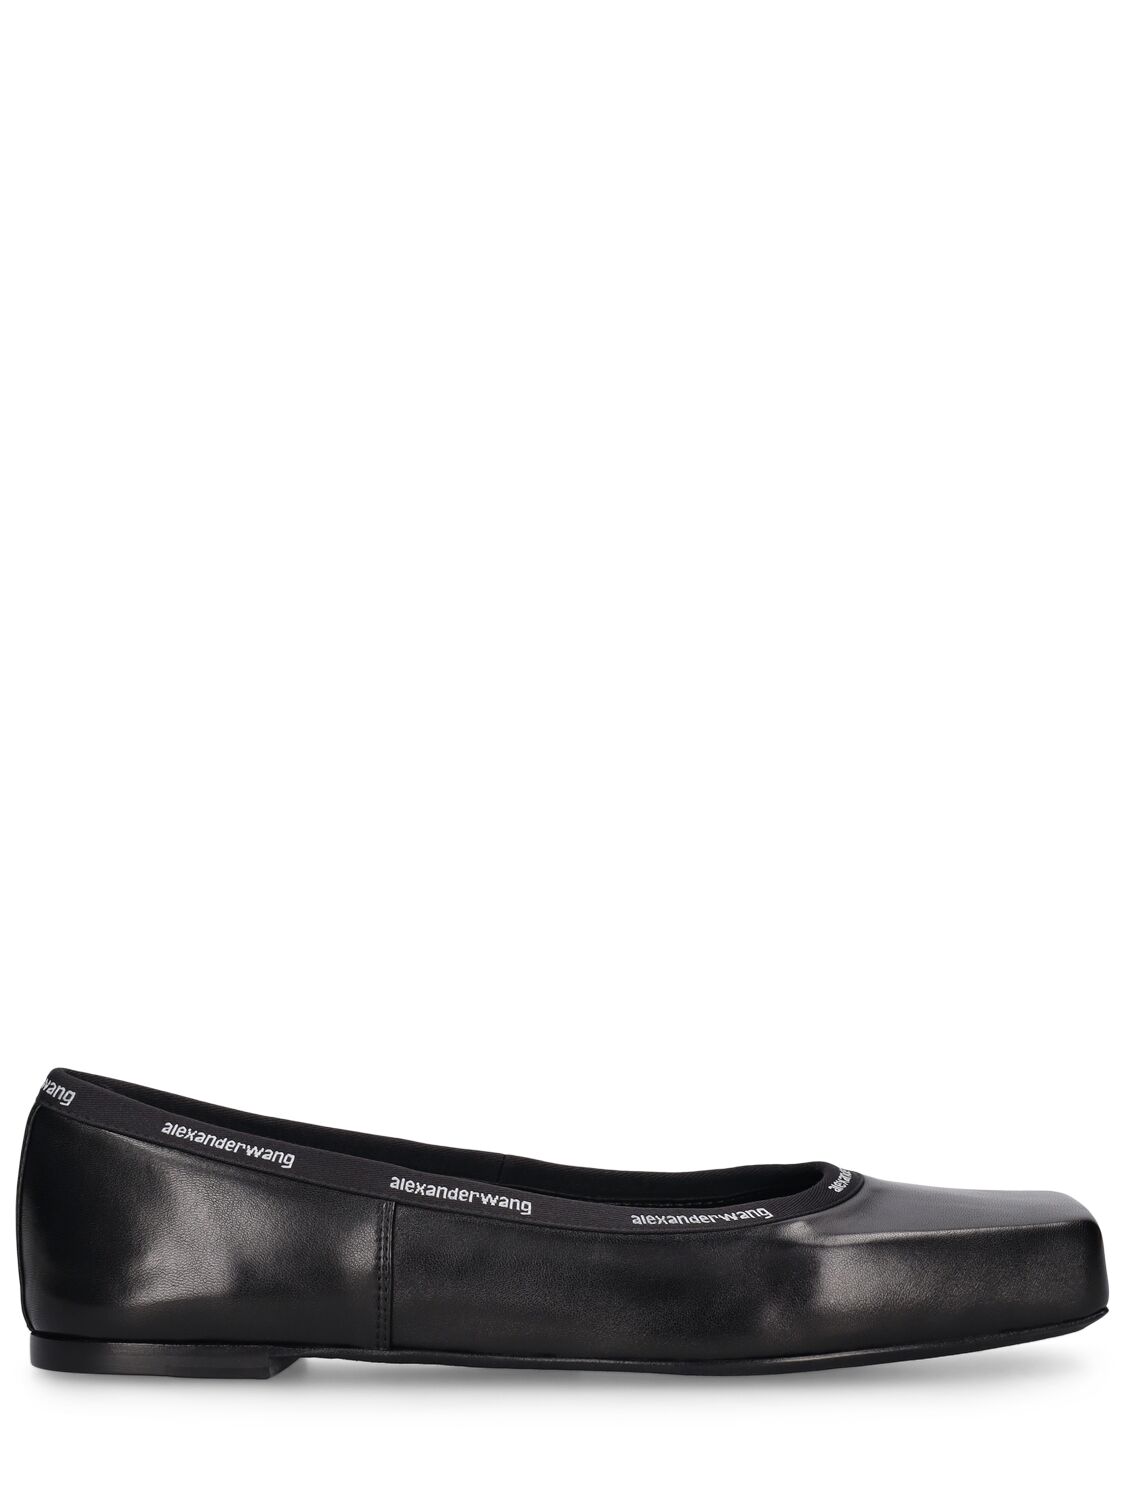 Image of 10mm Billie Leather Flats